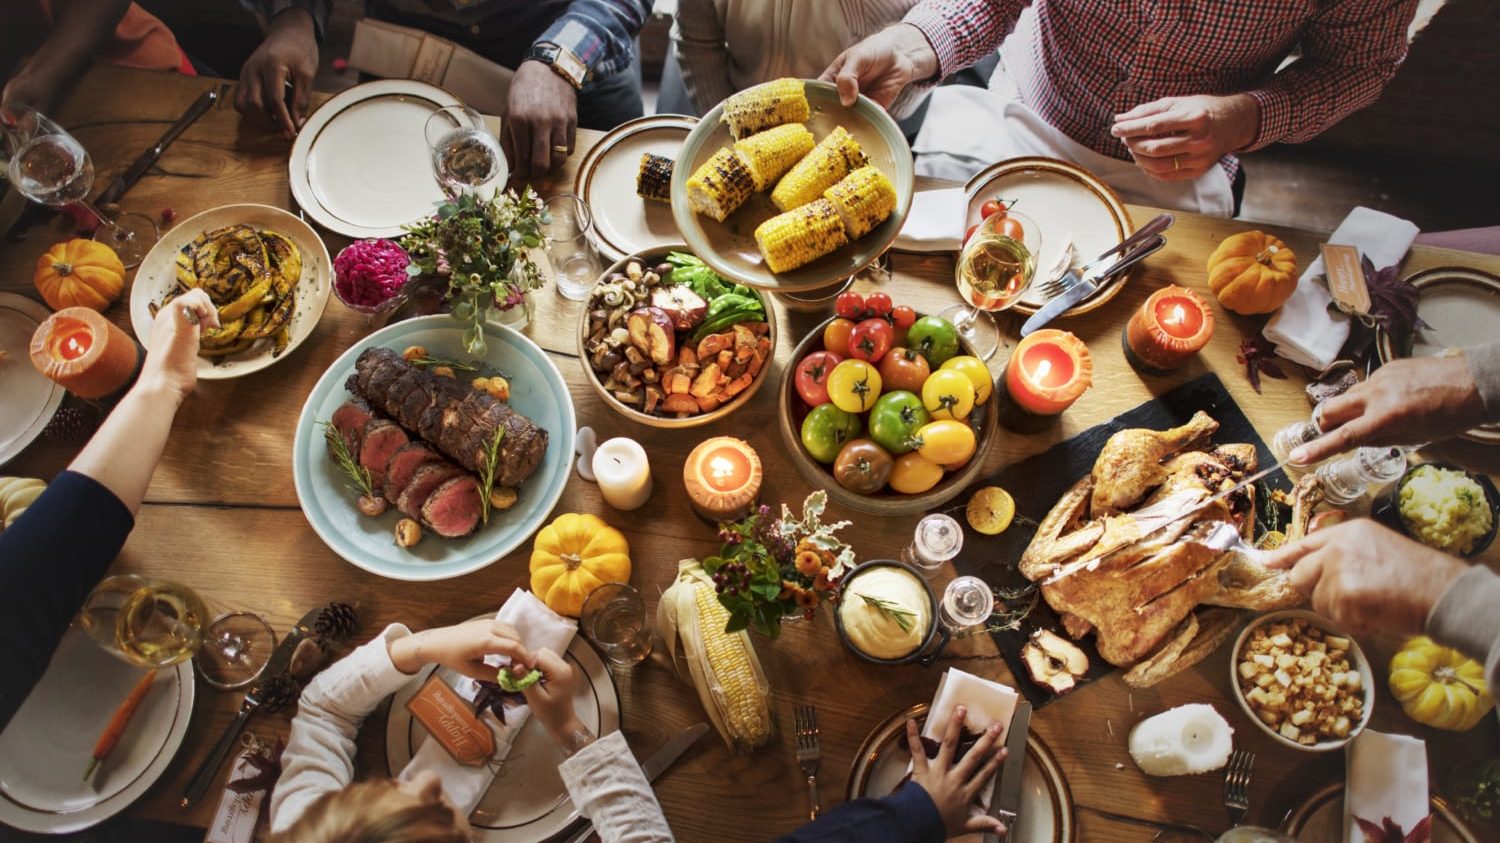 People gather around Thanksgiving table